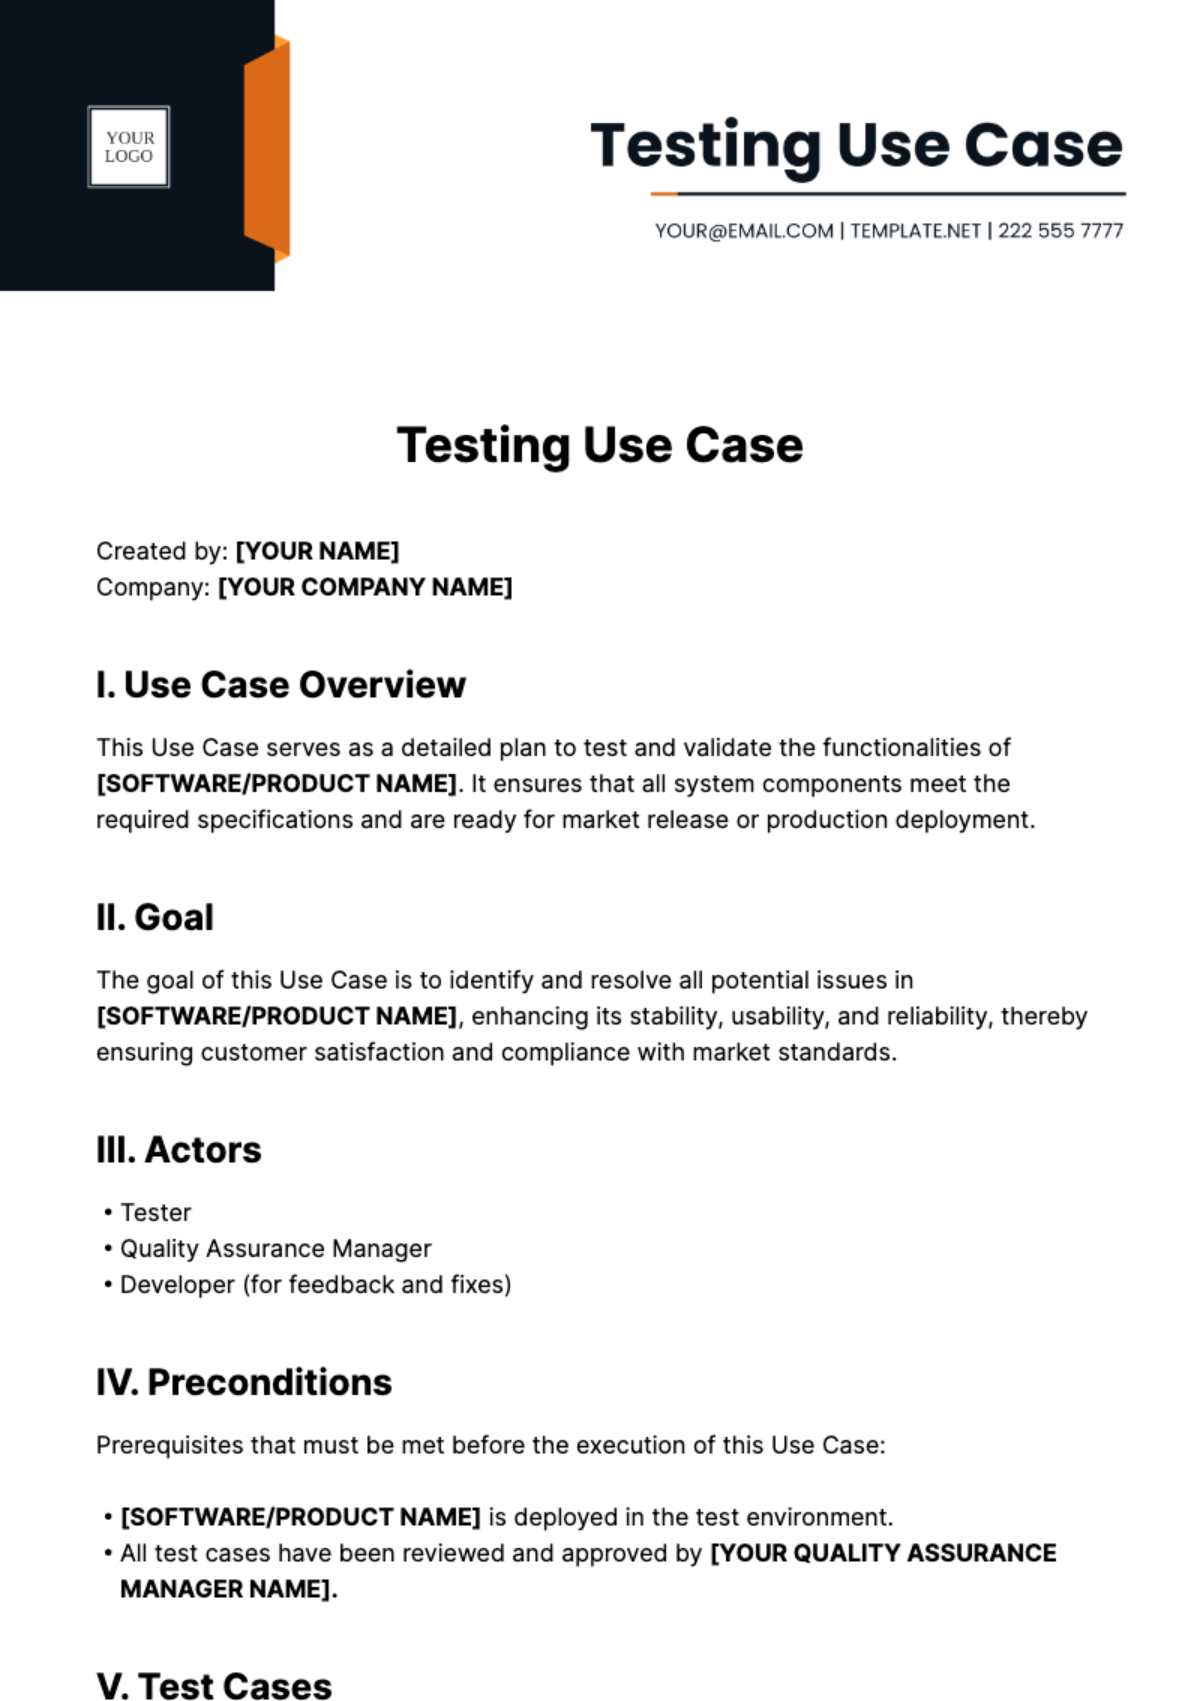 Free Testing Use Case Template